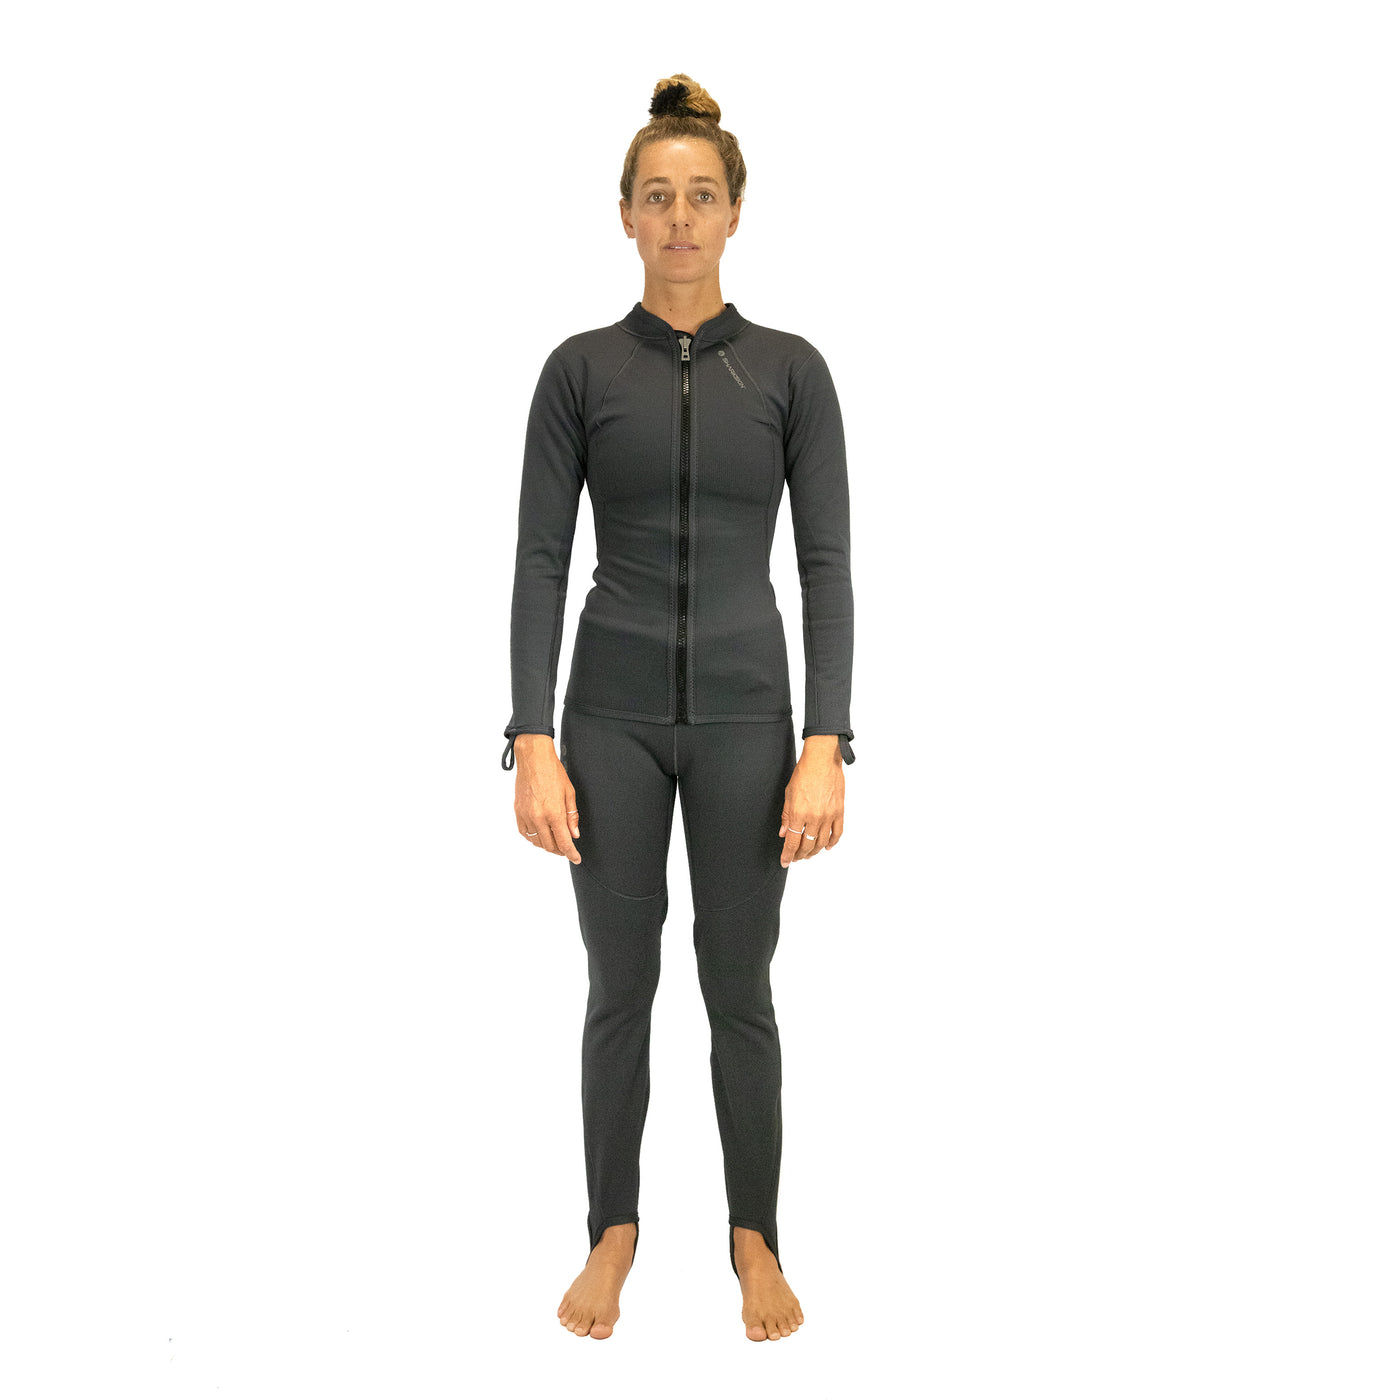 T2 CHILLPROOF ULTIMATE PACKAGE - WOMENS